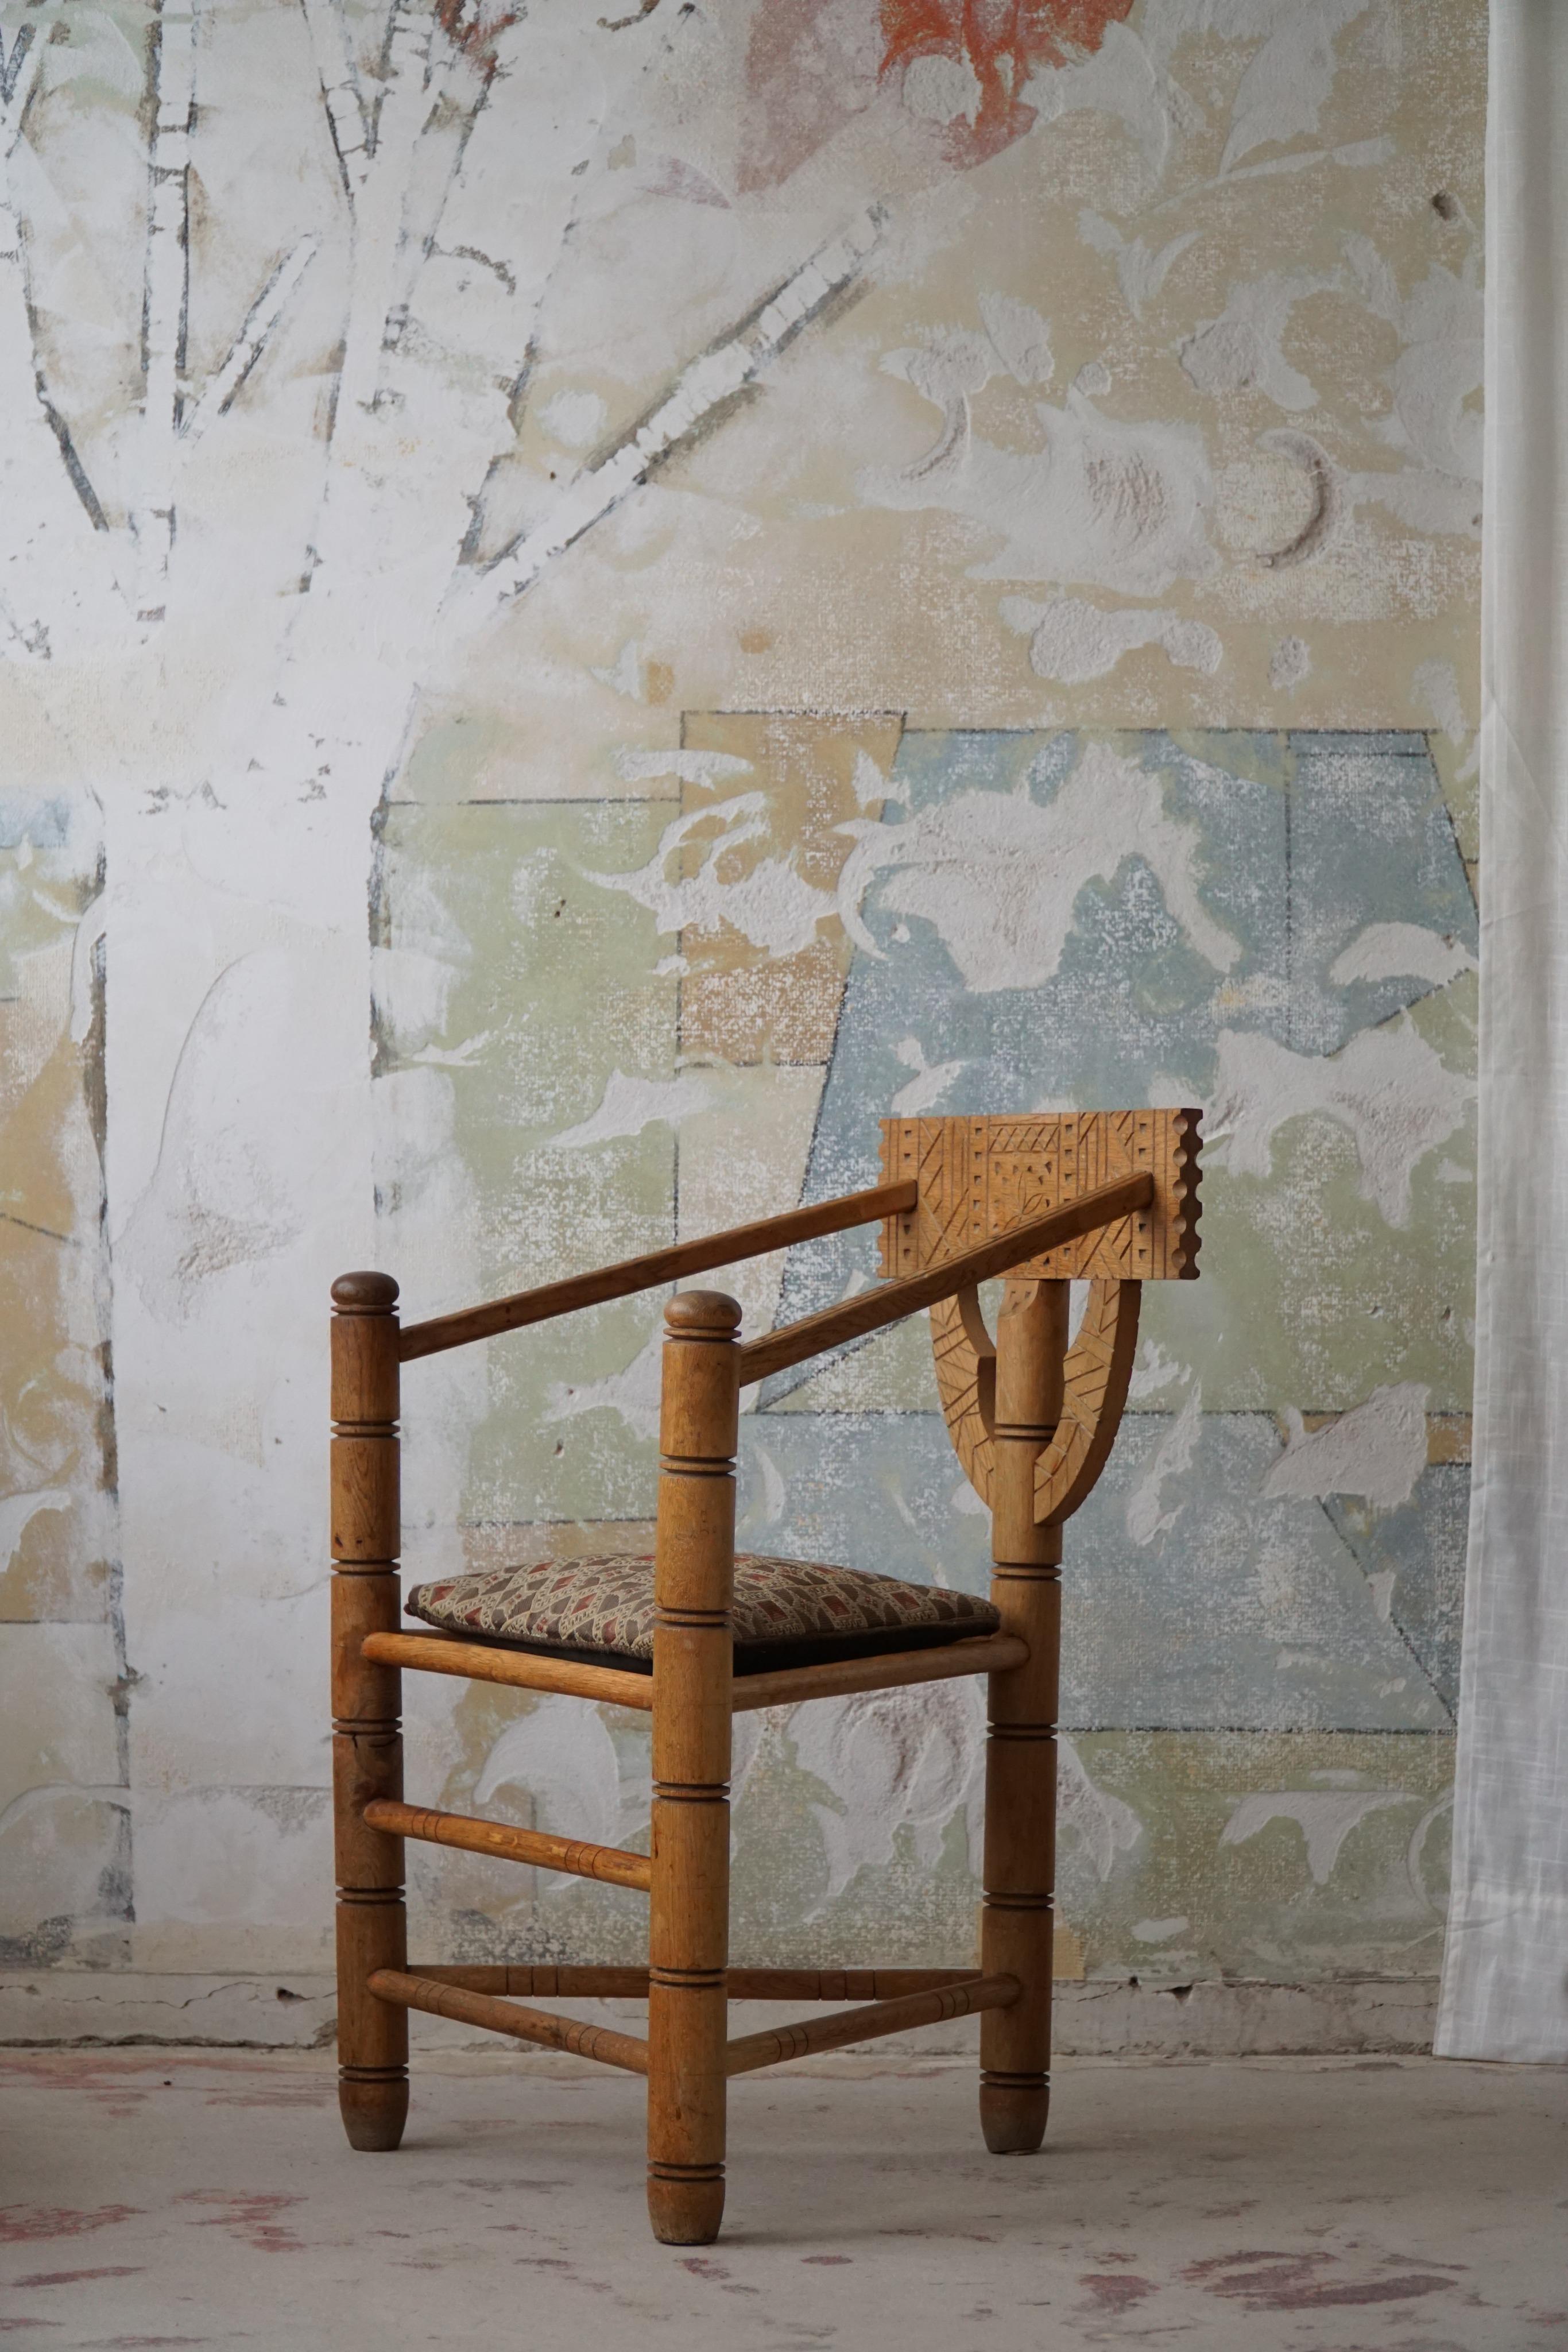 A sculptural vintage Monk chair made in solid oak with a comfortable seat cushion. Carved by a Swedish cabinetmaker in the early 20th century. A truely authentic wabi sabi chair in an overall good condition with a fine patina.

This fine decorative